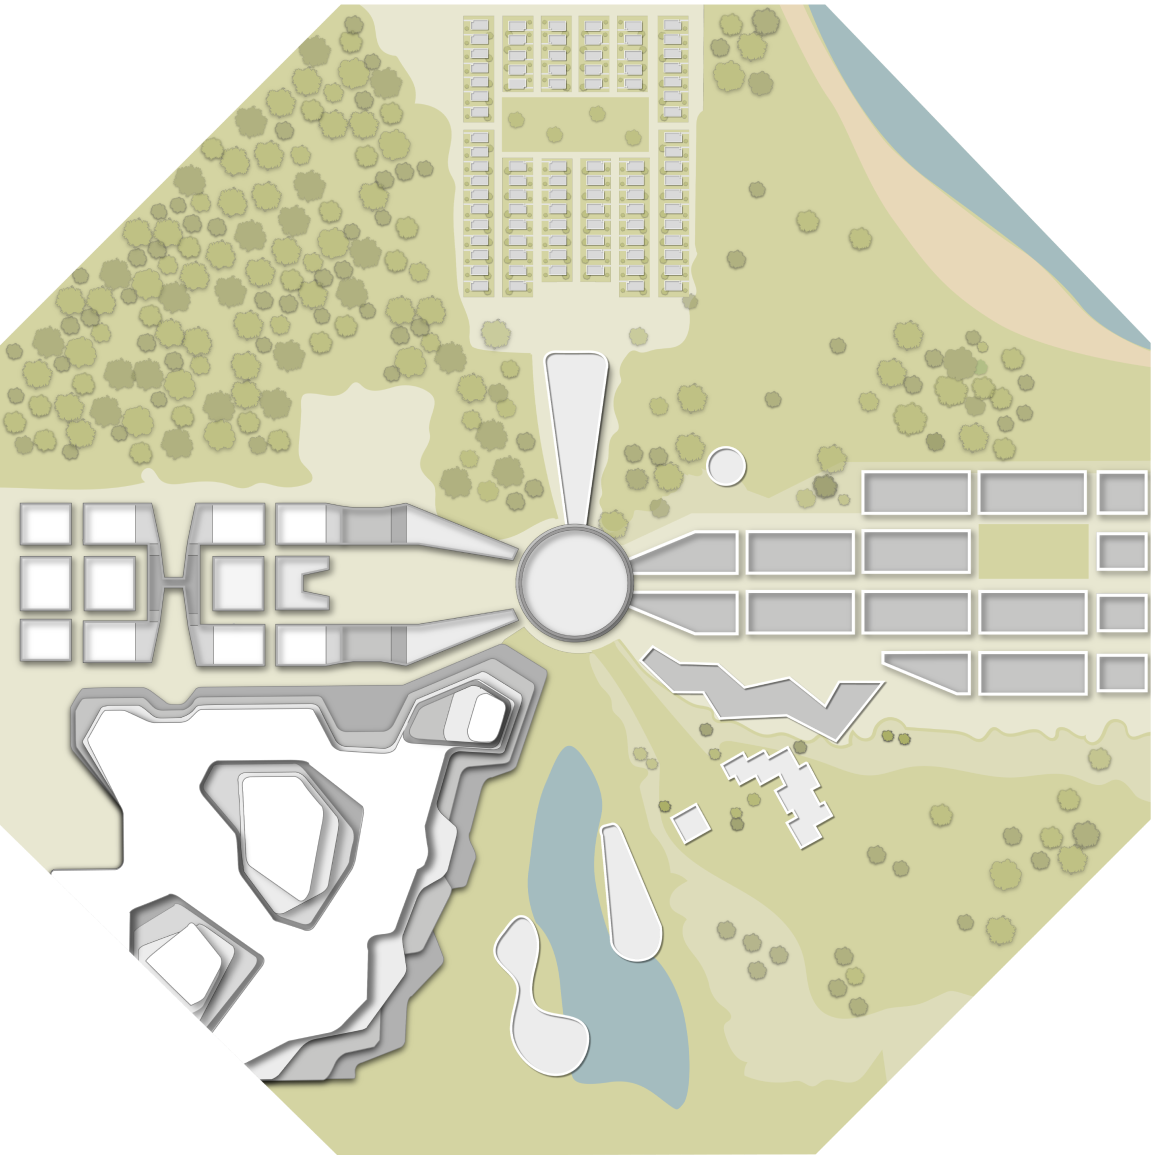 A site plan of the meta-utopian city with many different sections and areas